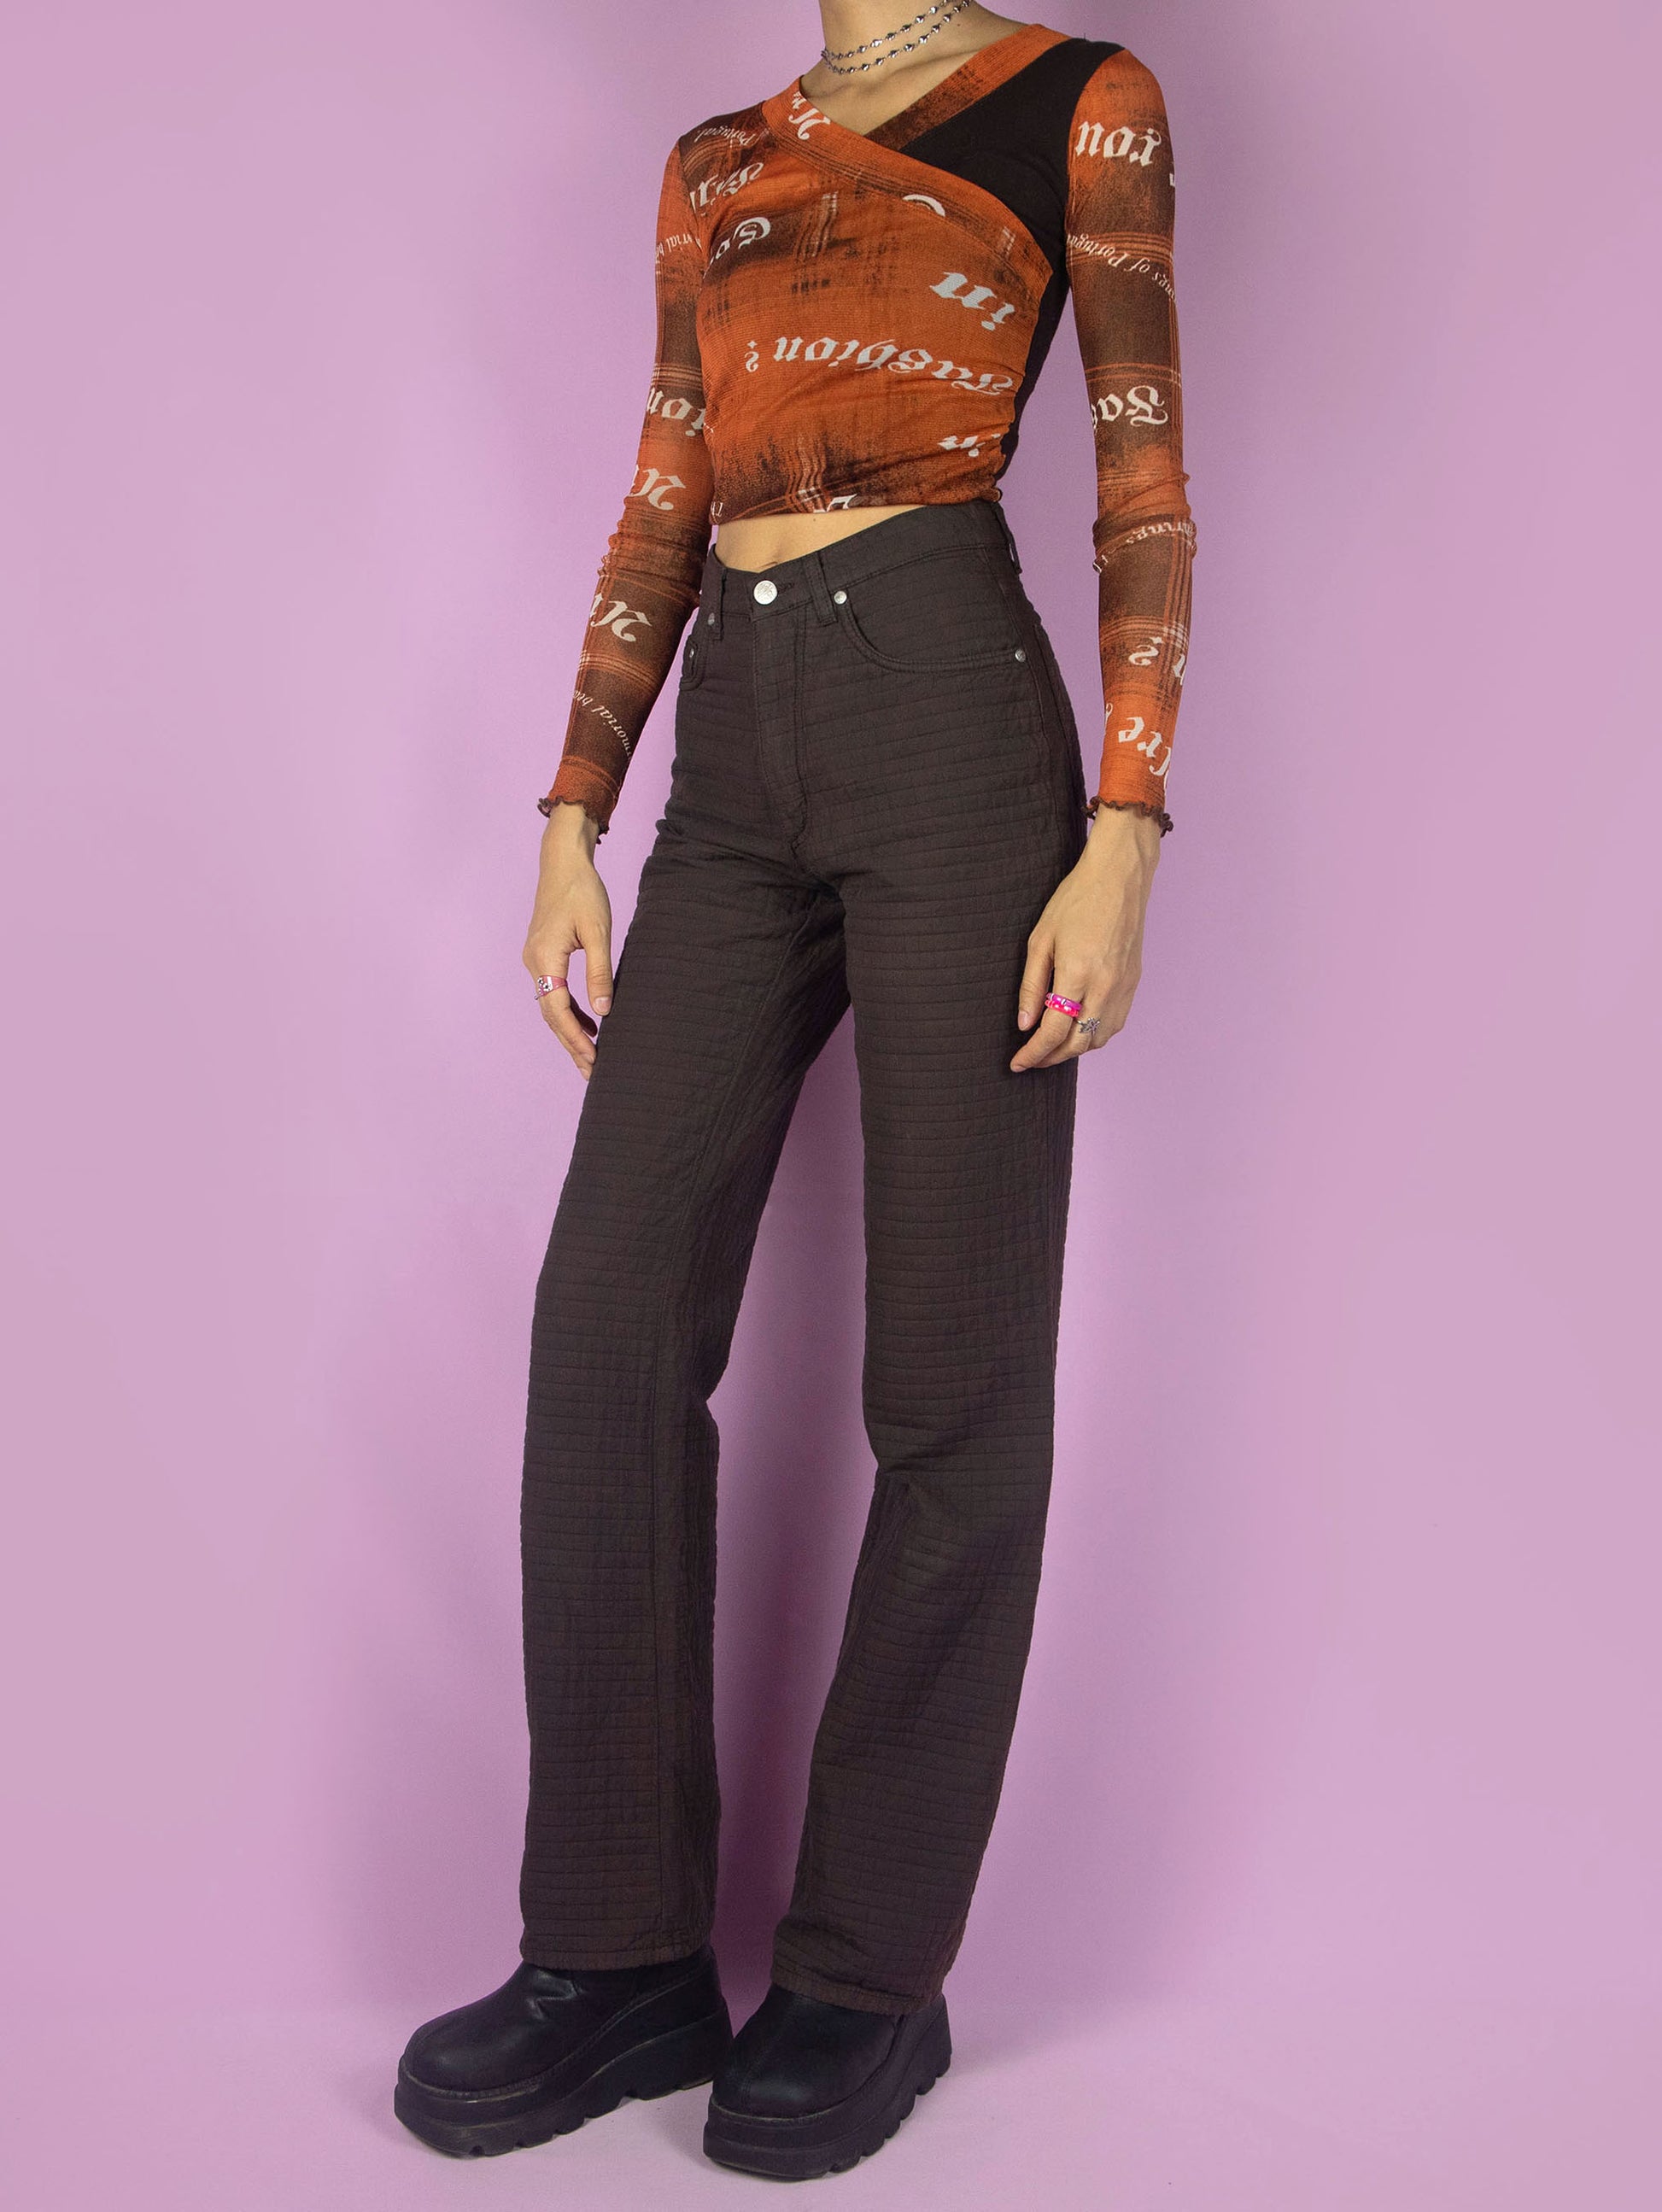 The Vintage 90s Brown Straight Leg Pants are high-waisted trousers with pockets and a front zipper closure. Made in Italy. Excellent vintage condition.